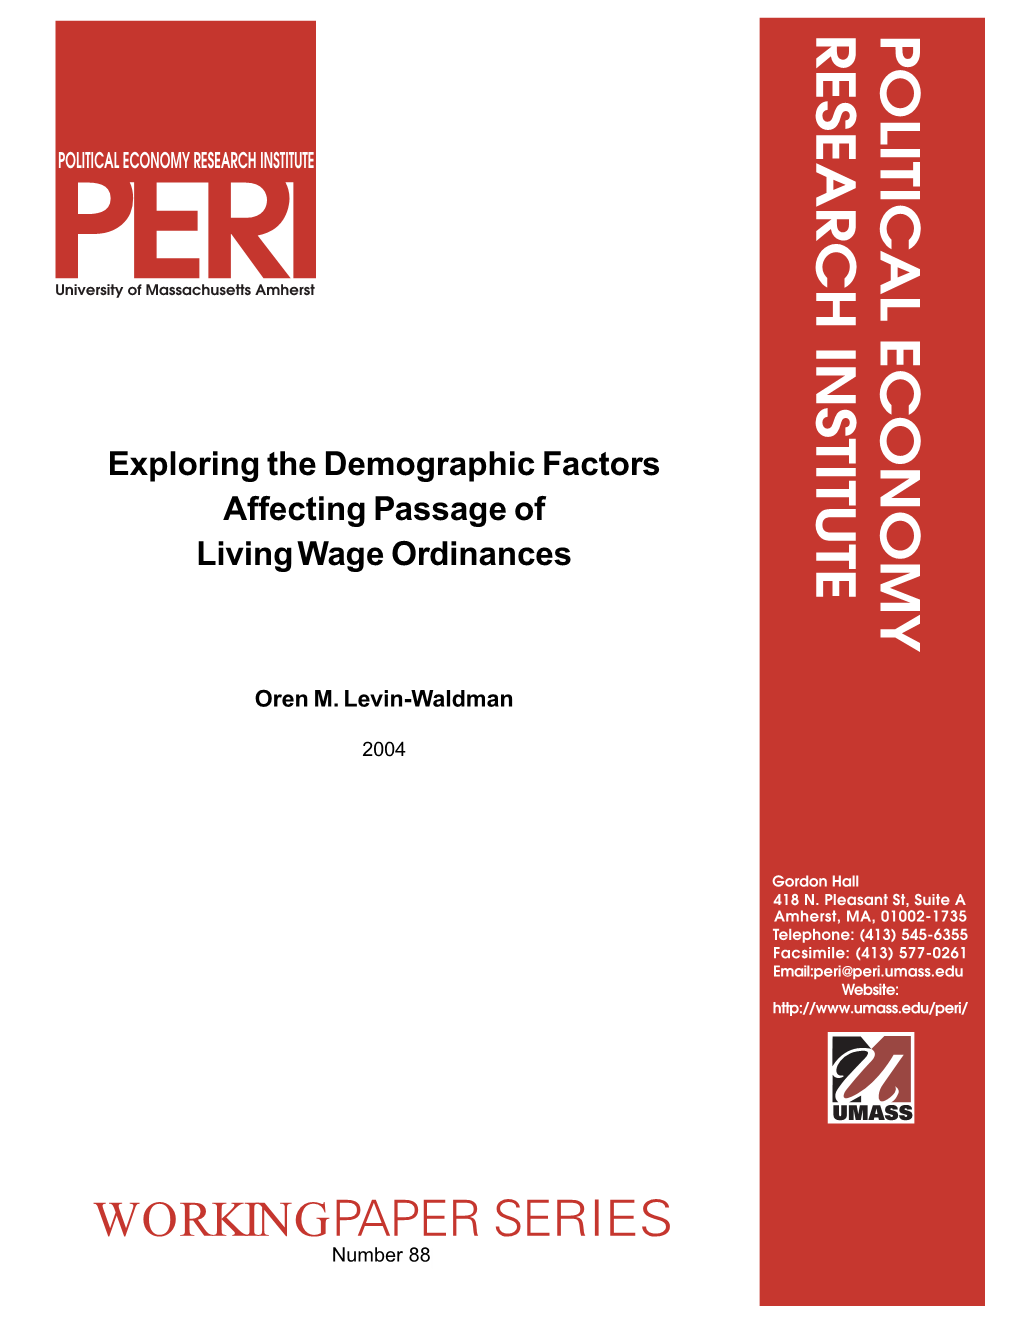 Exploring the Demographic Factors Affecting Passage of Living Wage Ordinances